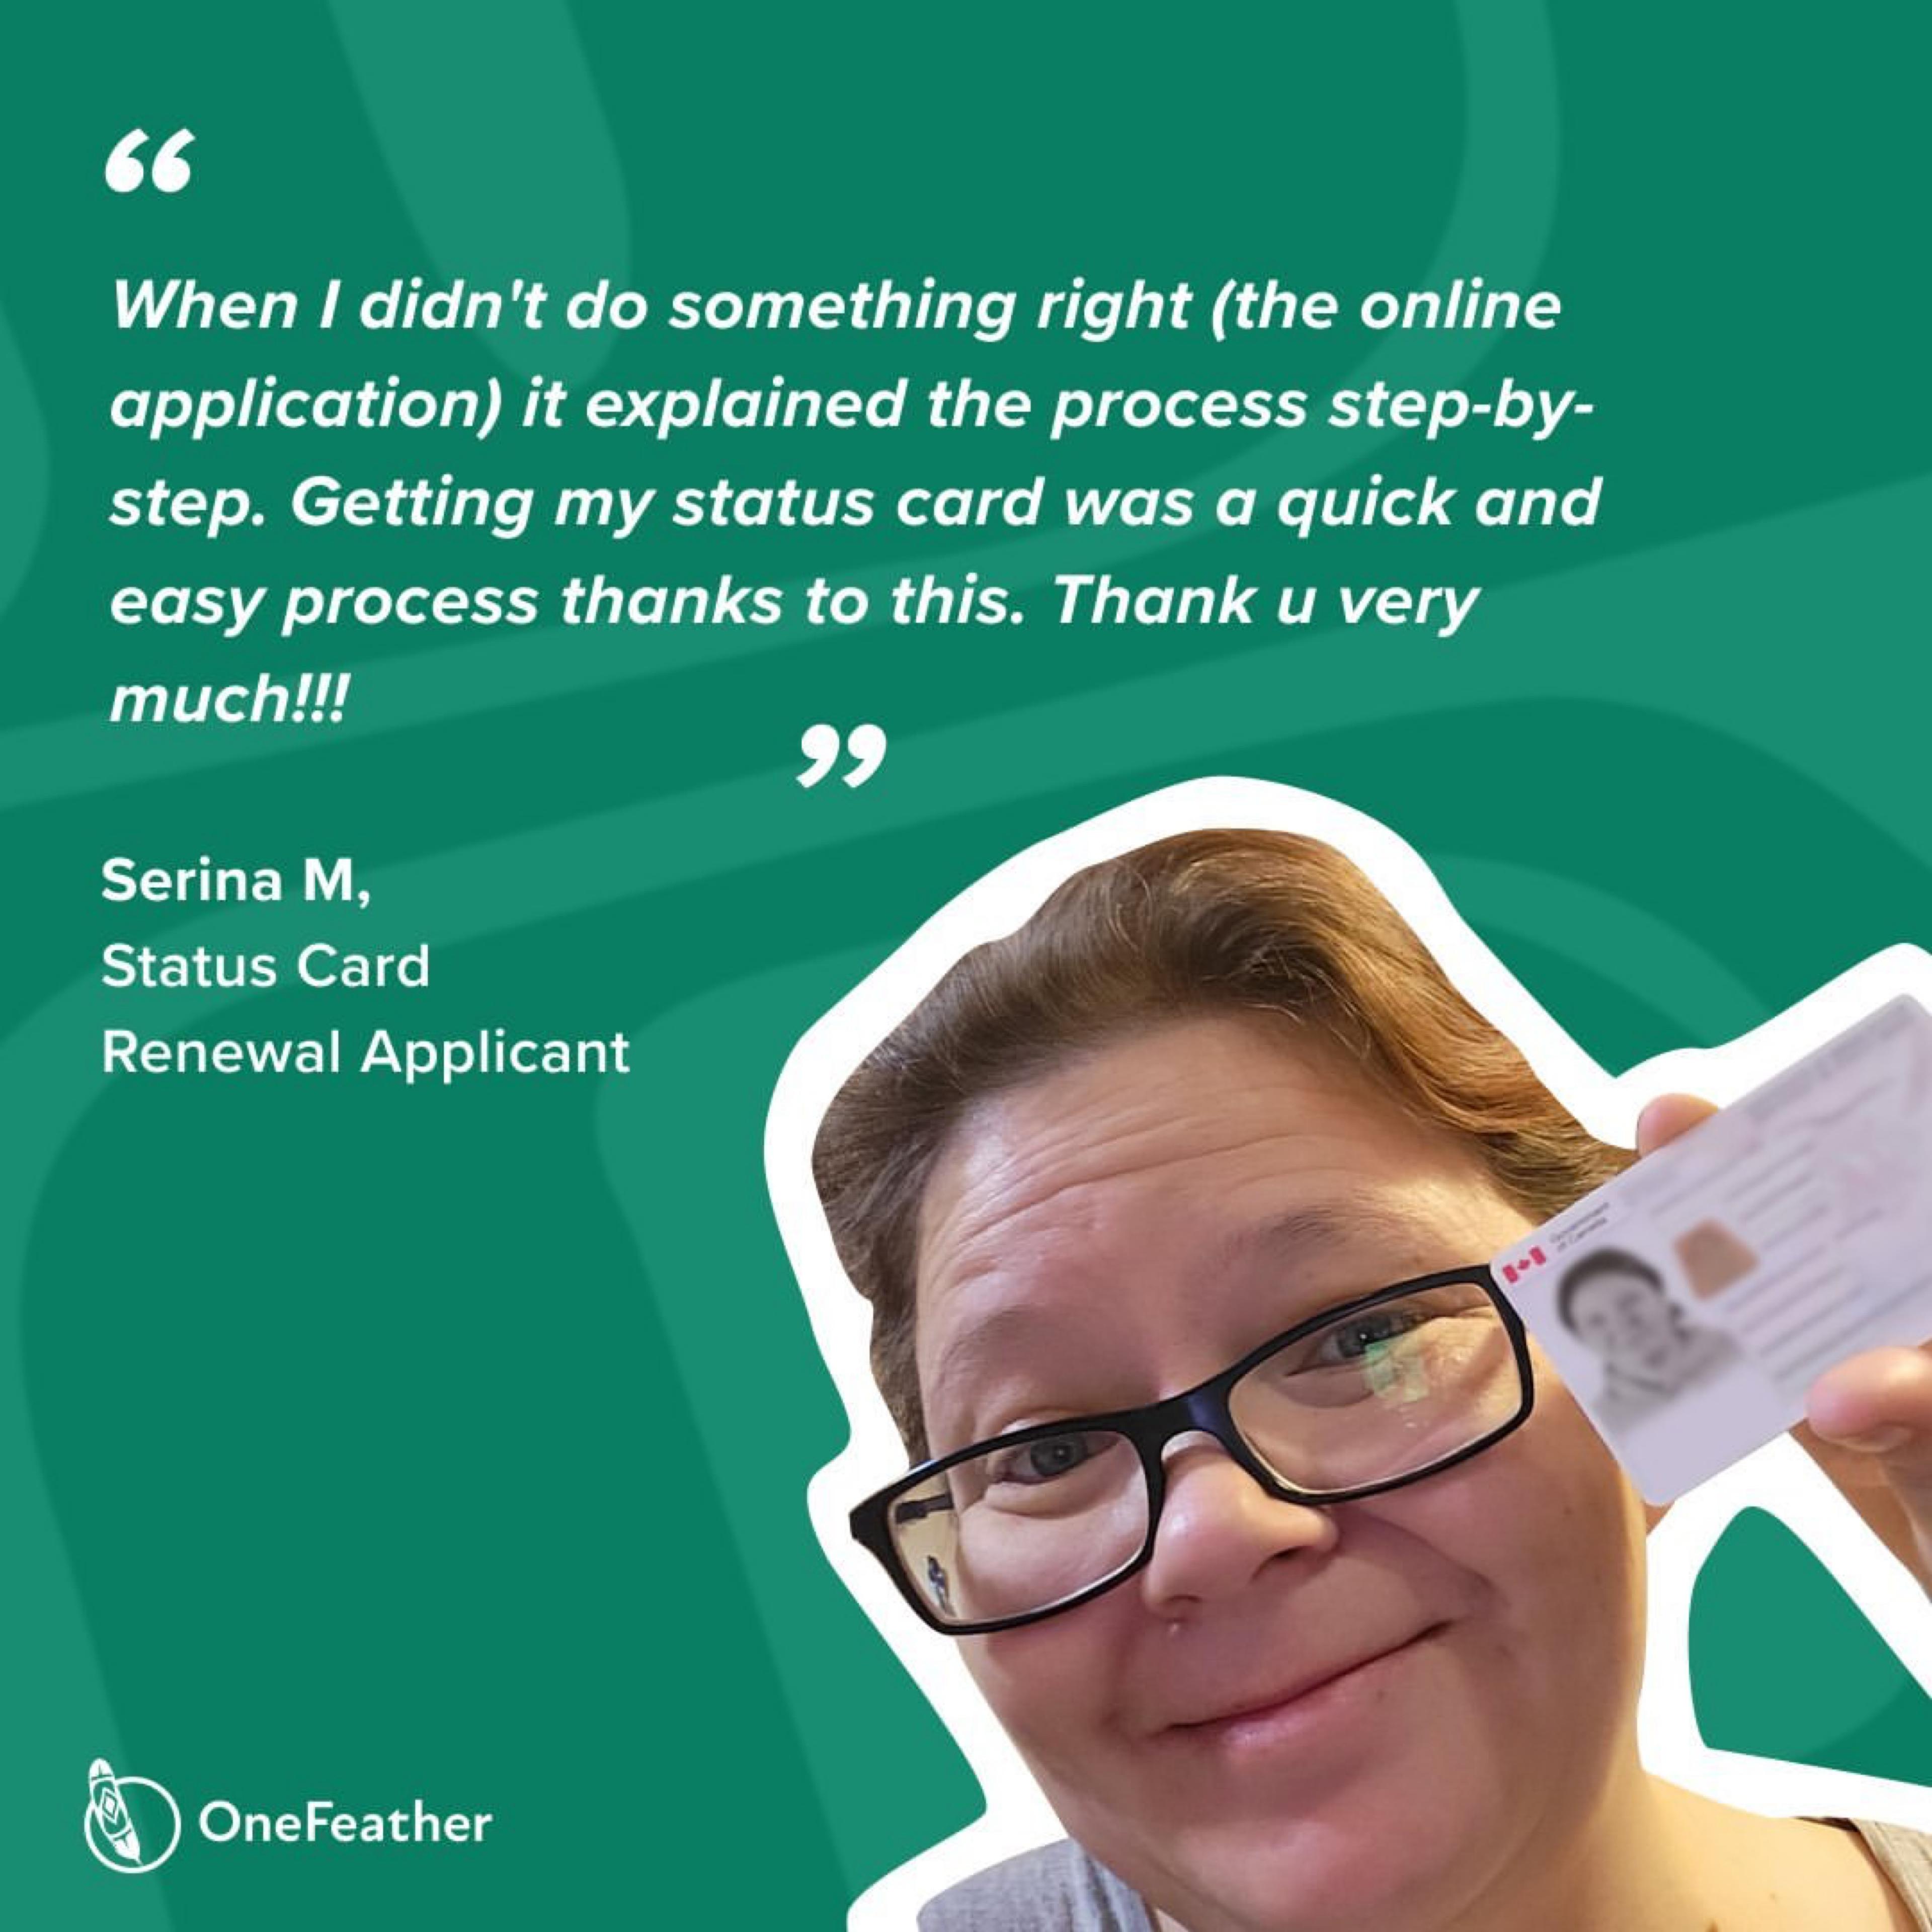 Serina's experience doing a status card application with OneFeather 🧡